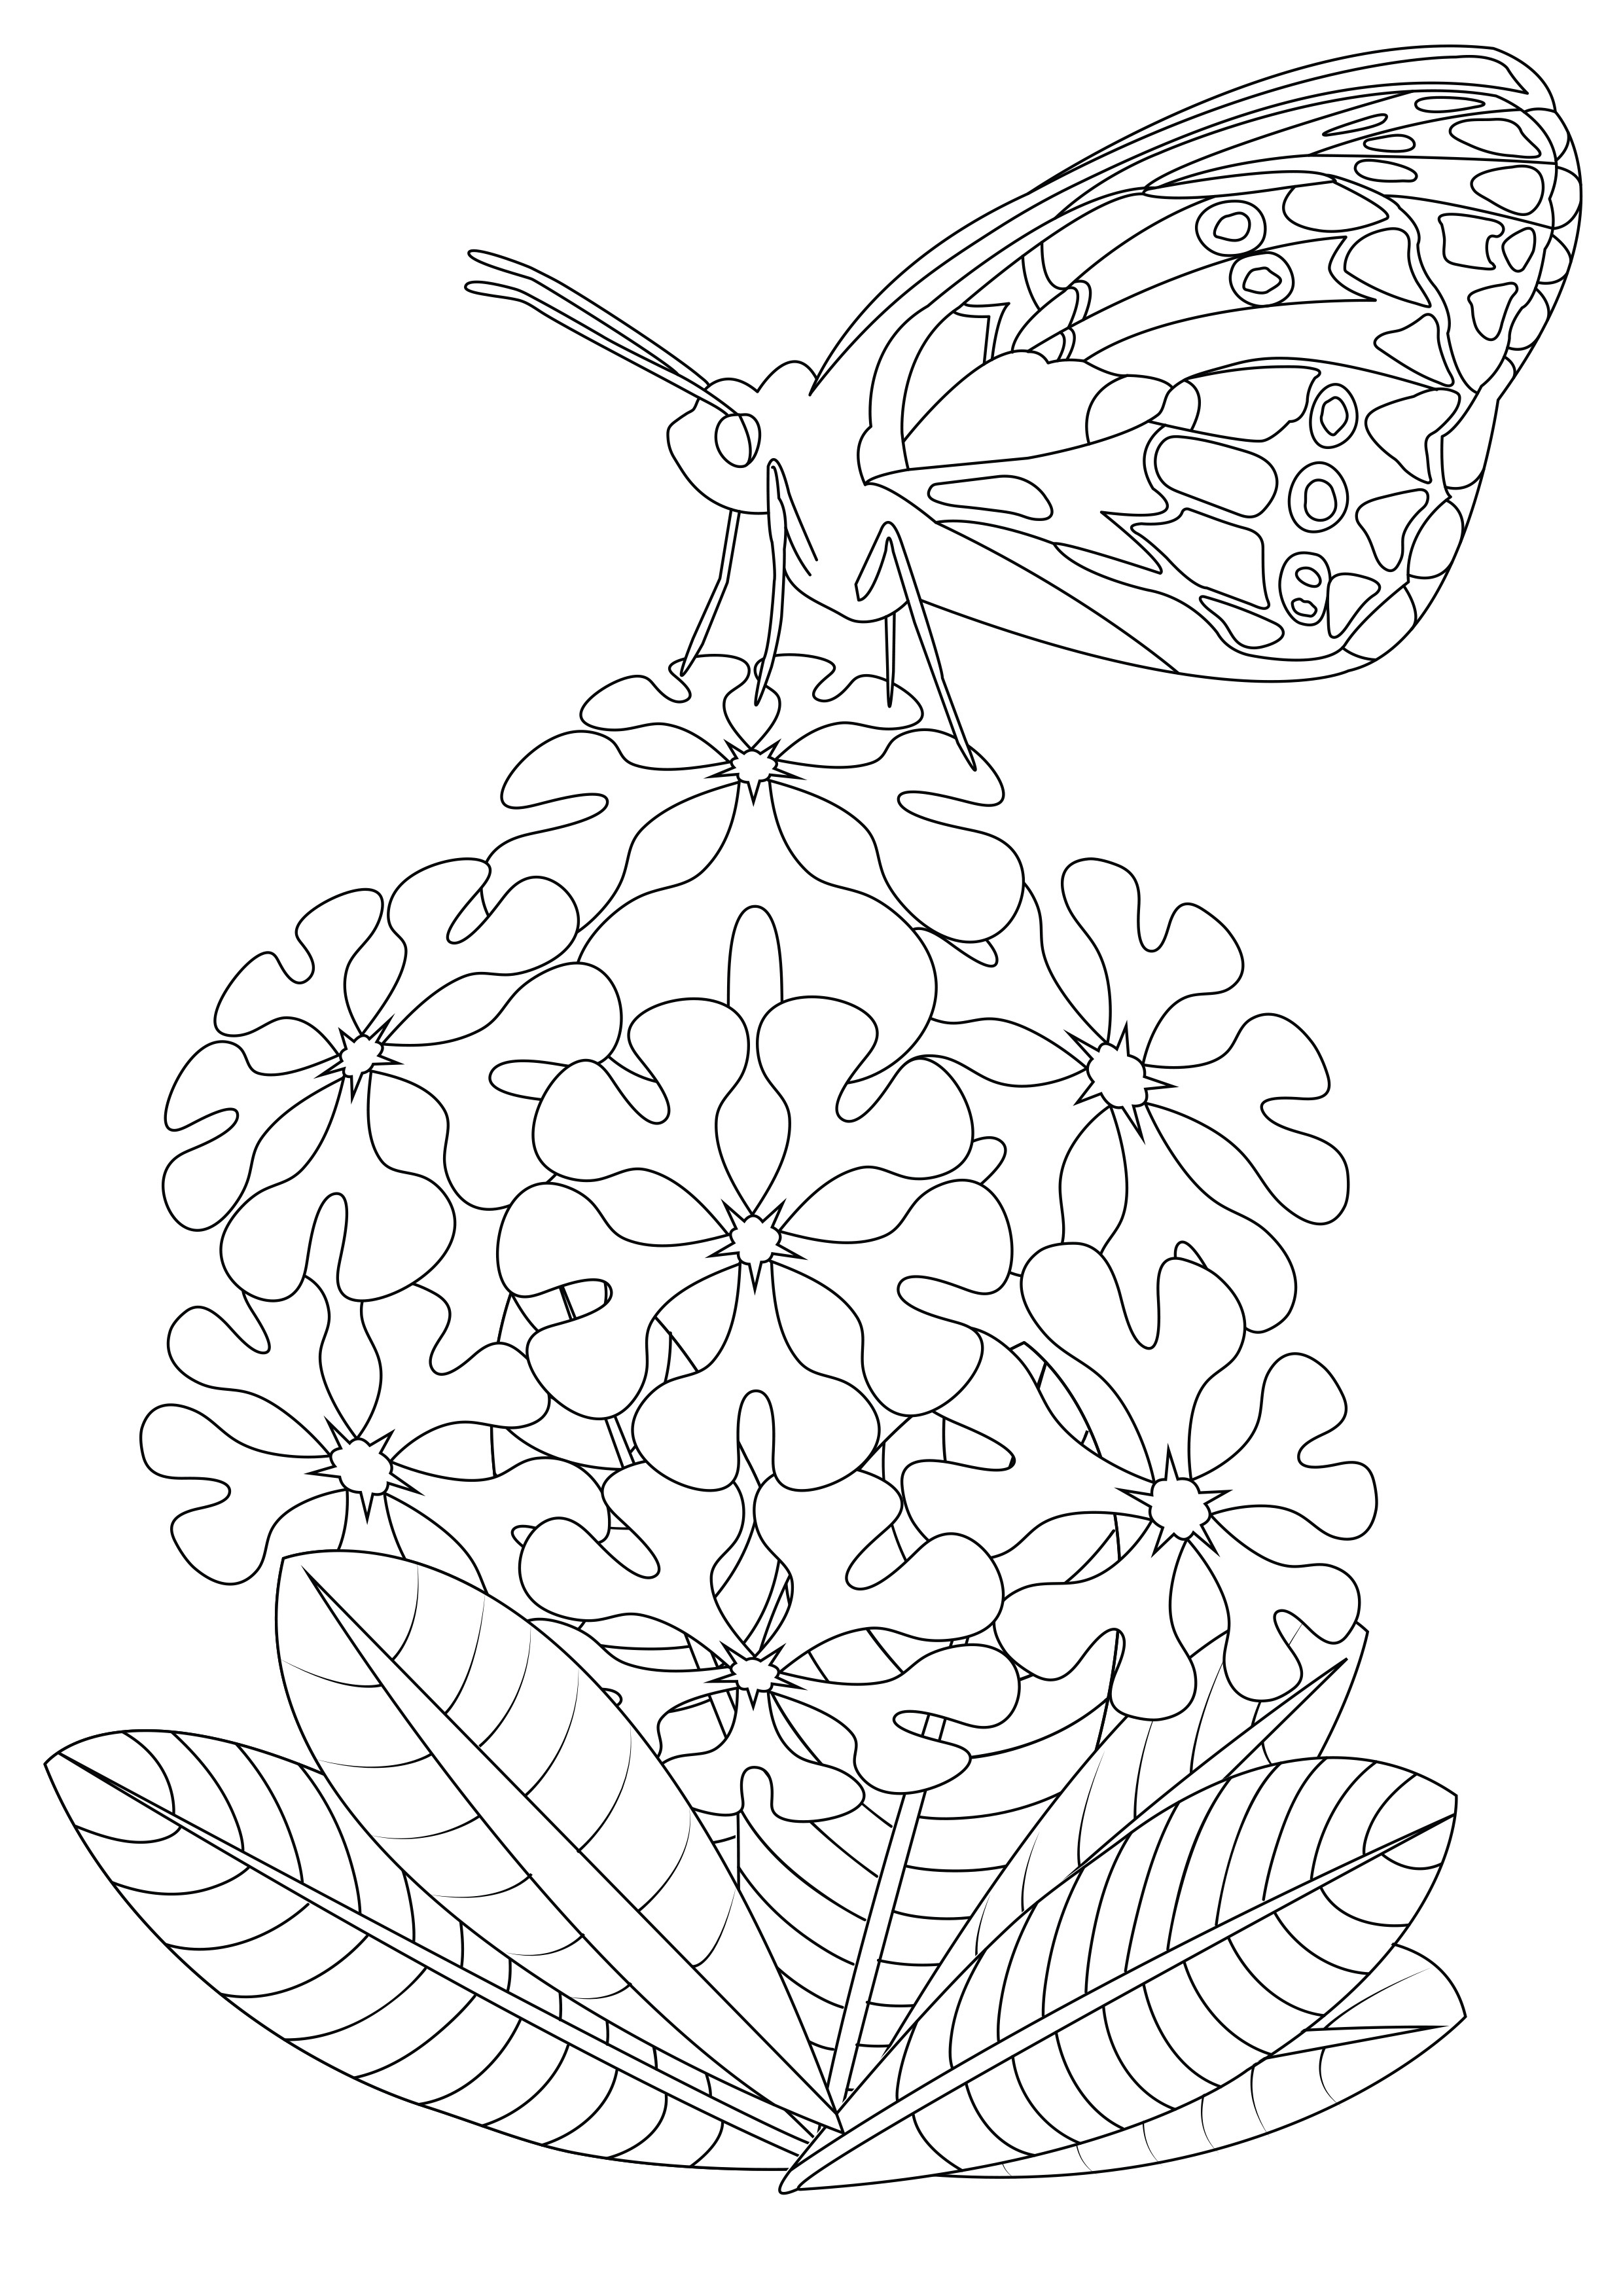 Butterfly & flowers, from the coloring book 'Butterfly garden', by Emma L Williams